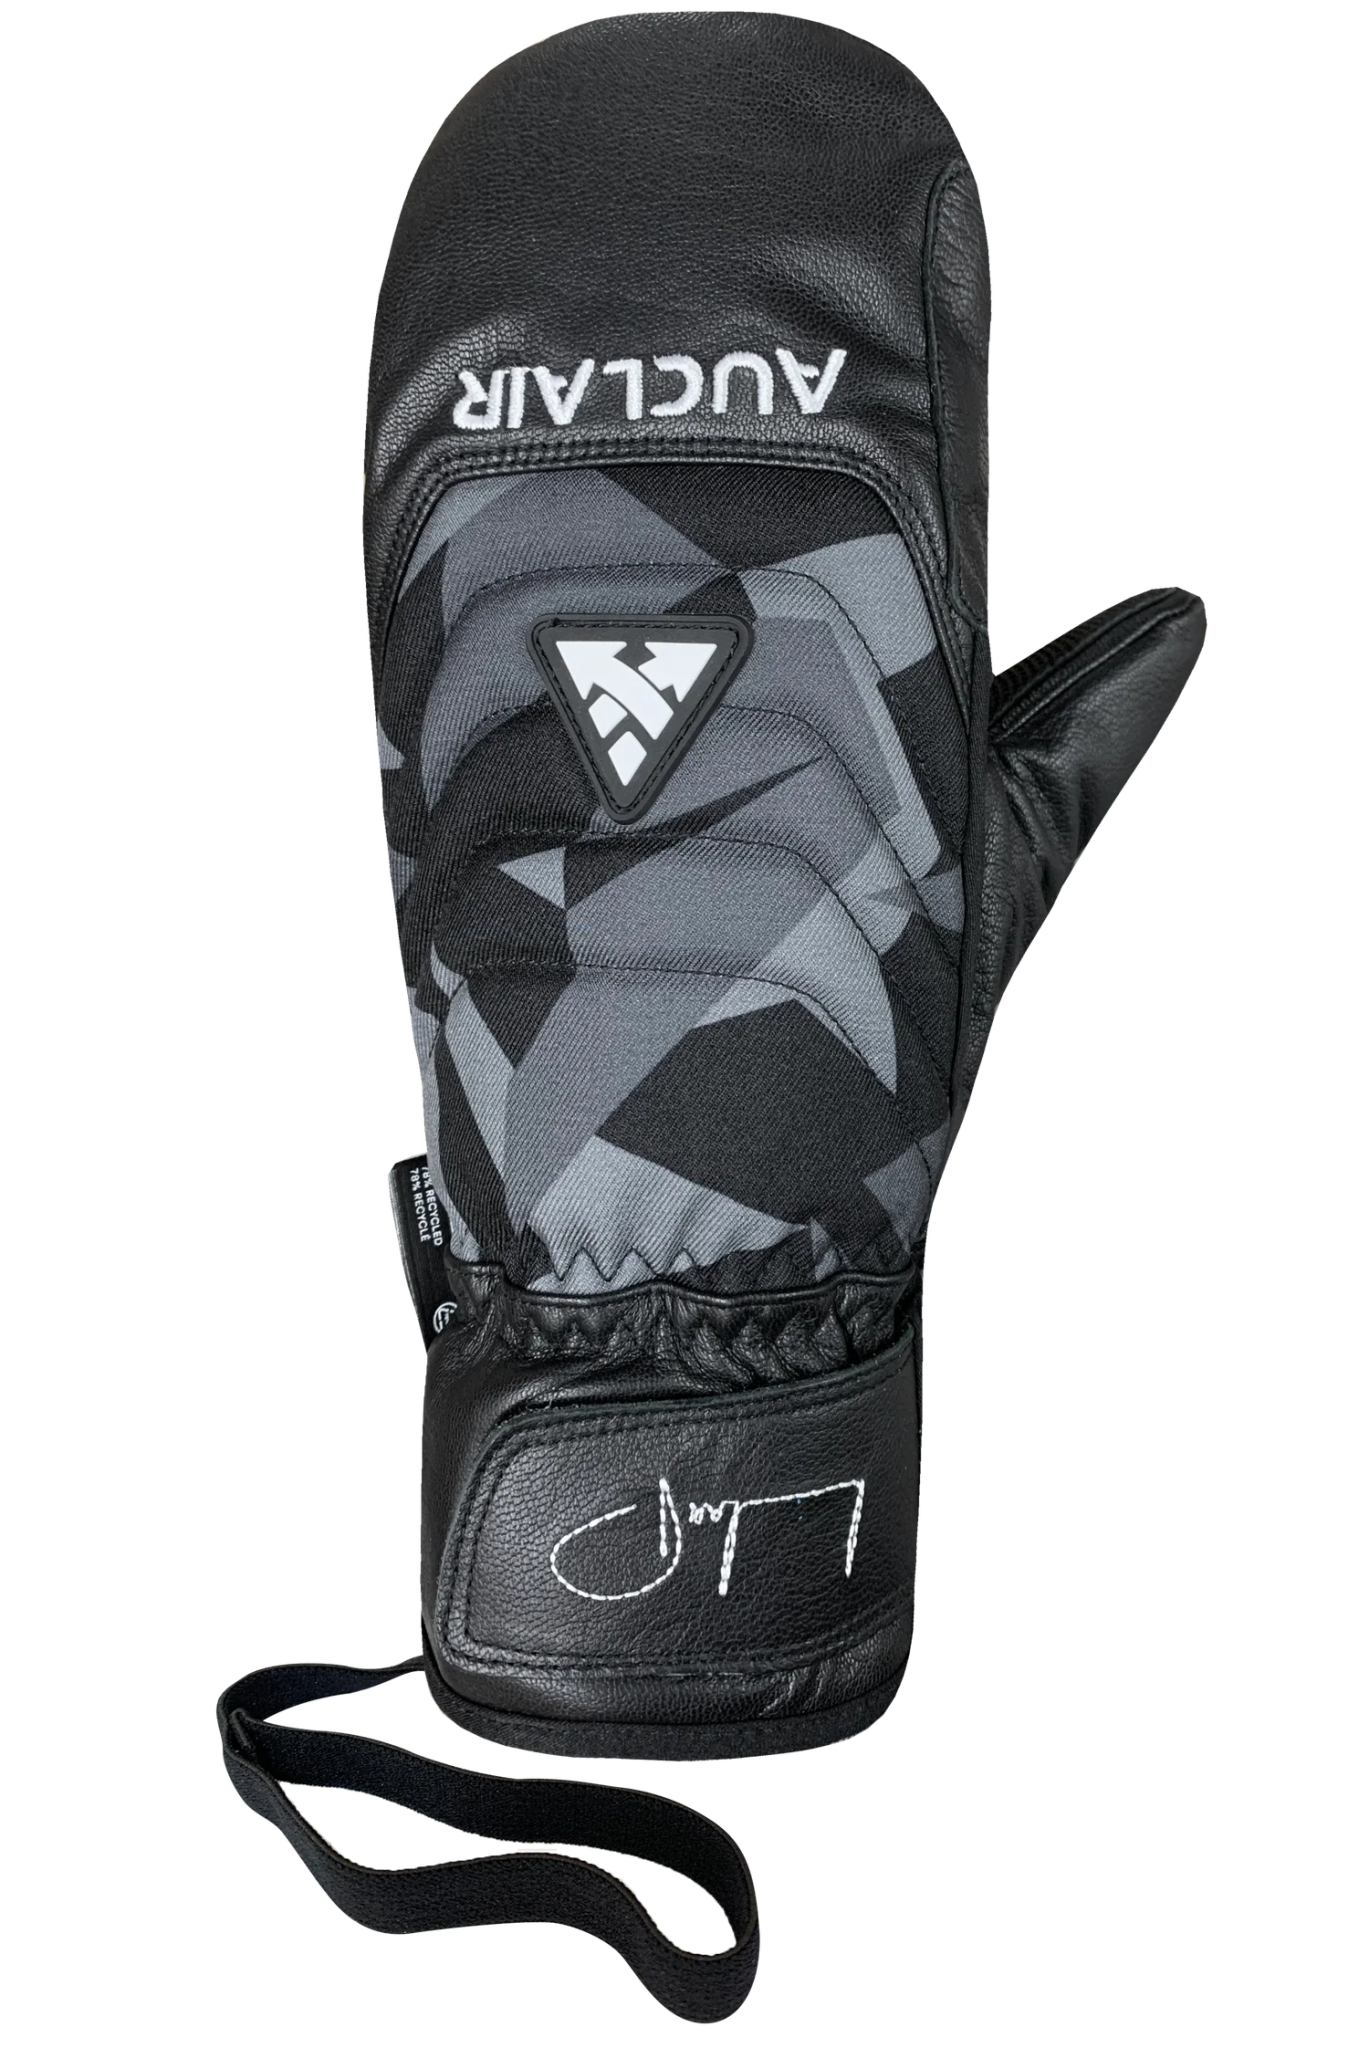 Auclair Max Parrot Pro Mitts Black/Camo - FULLSEND SKI AND OUTDOOR